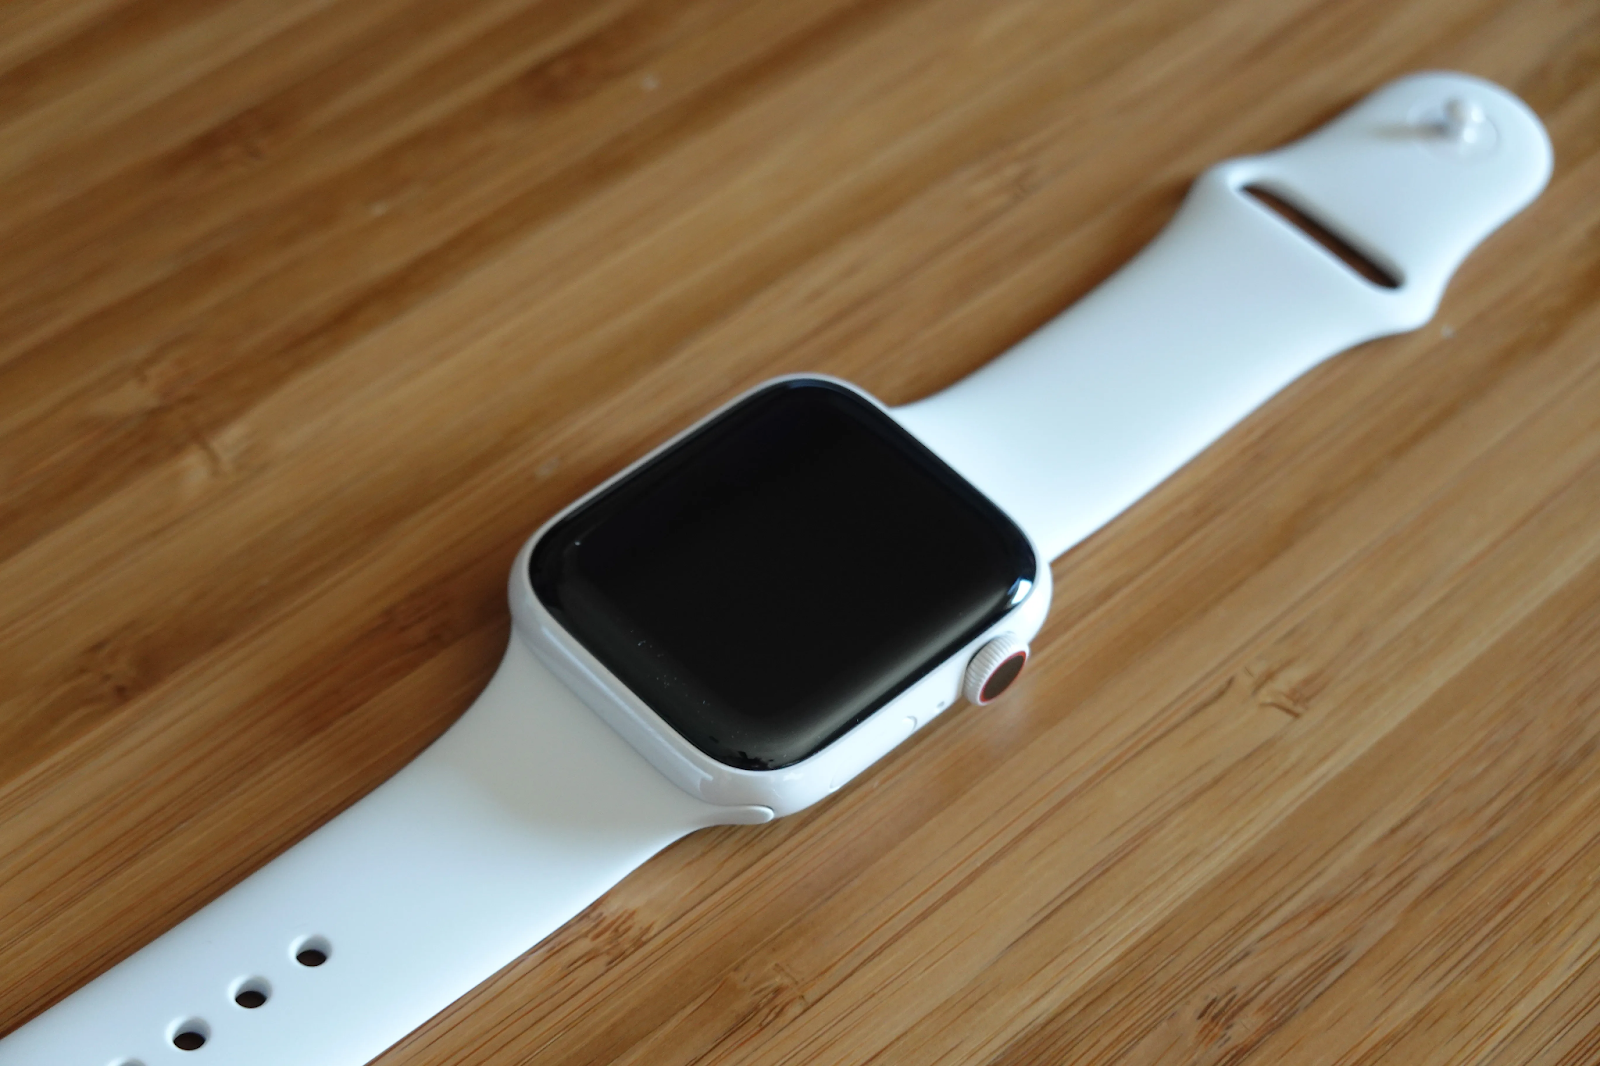 Apple Watch was designed to be rectangular